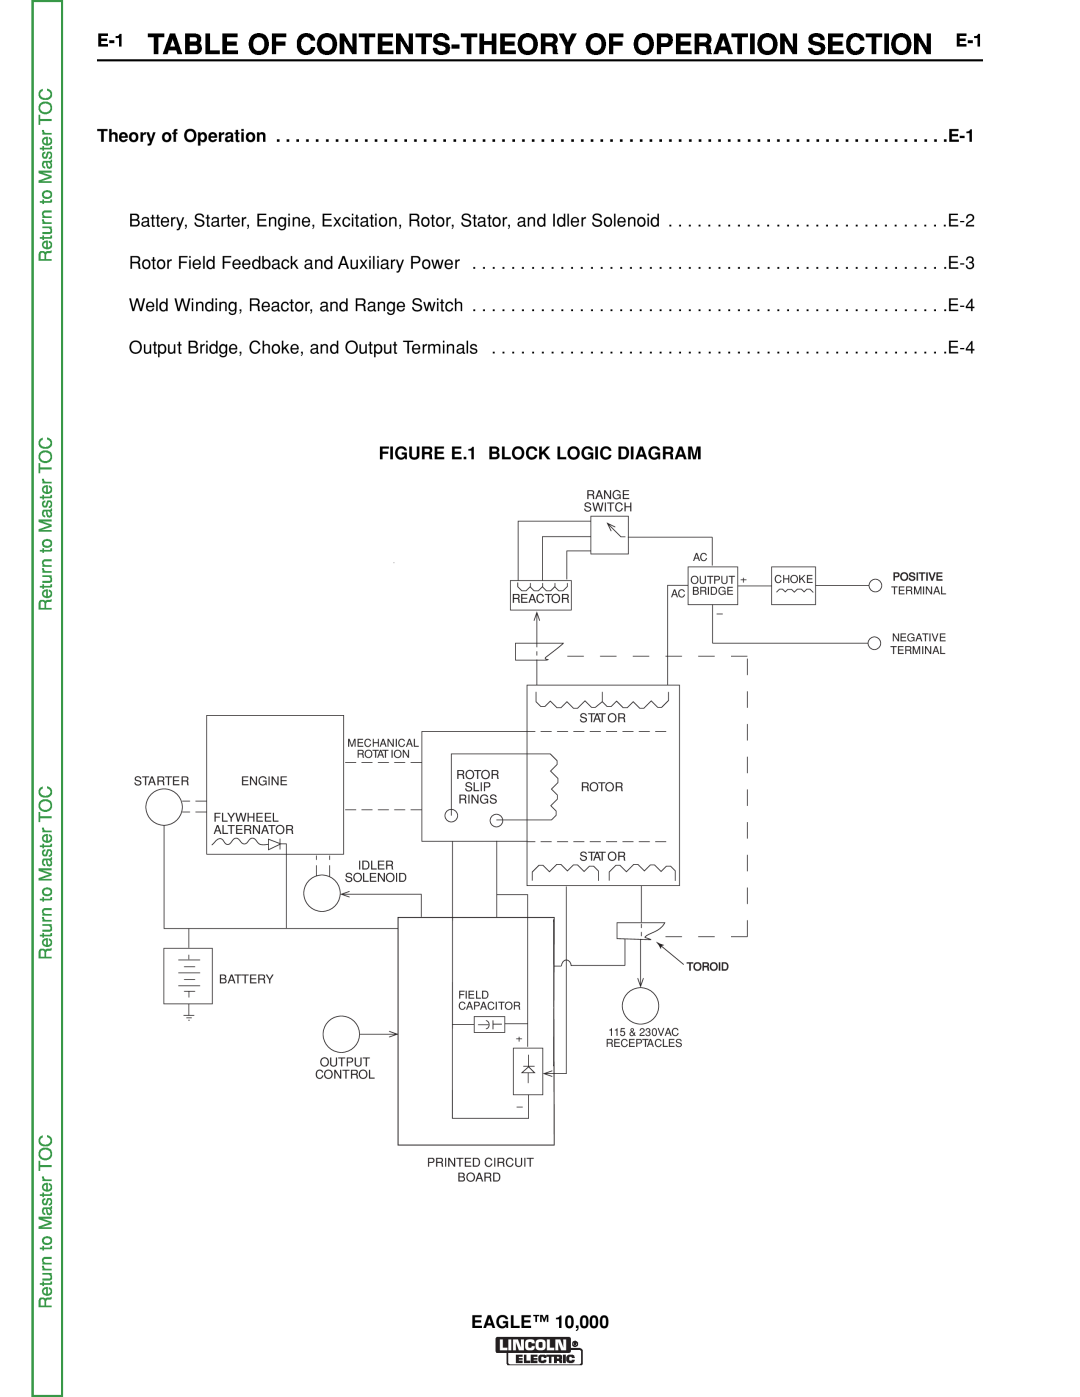 Lincoln Electric SVM192-A E-1 TABLE OF CONTENTS-THEORY OF OPERATION SECTION E-1, FIGURE E.1 BLOCK LOGIC DIAGRAM 